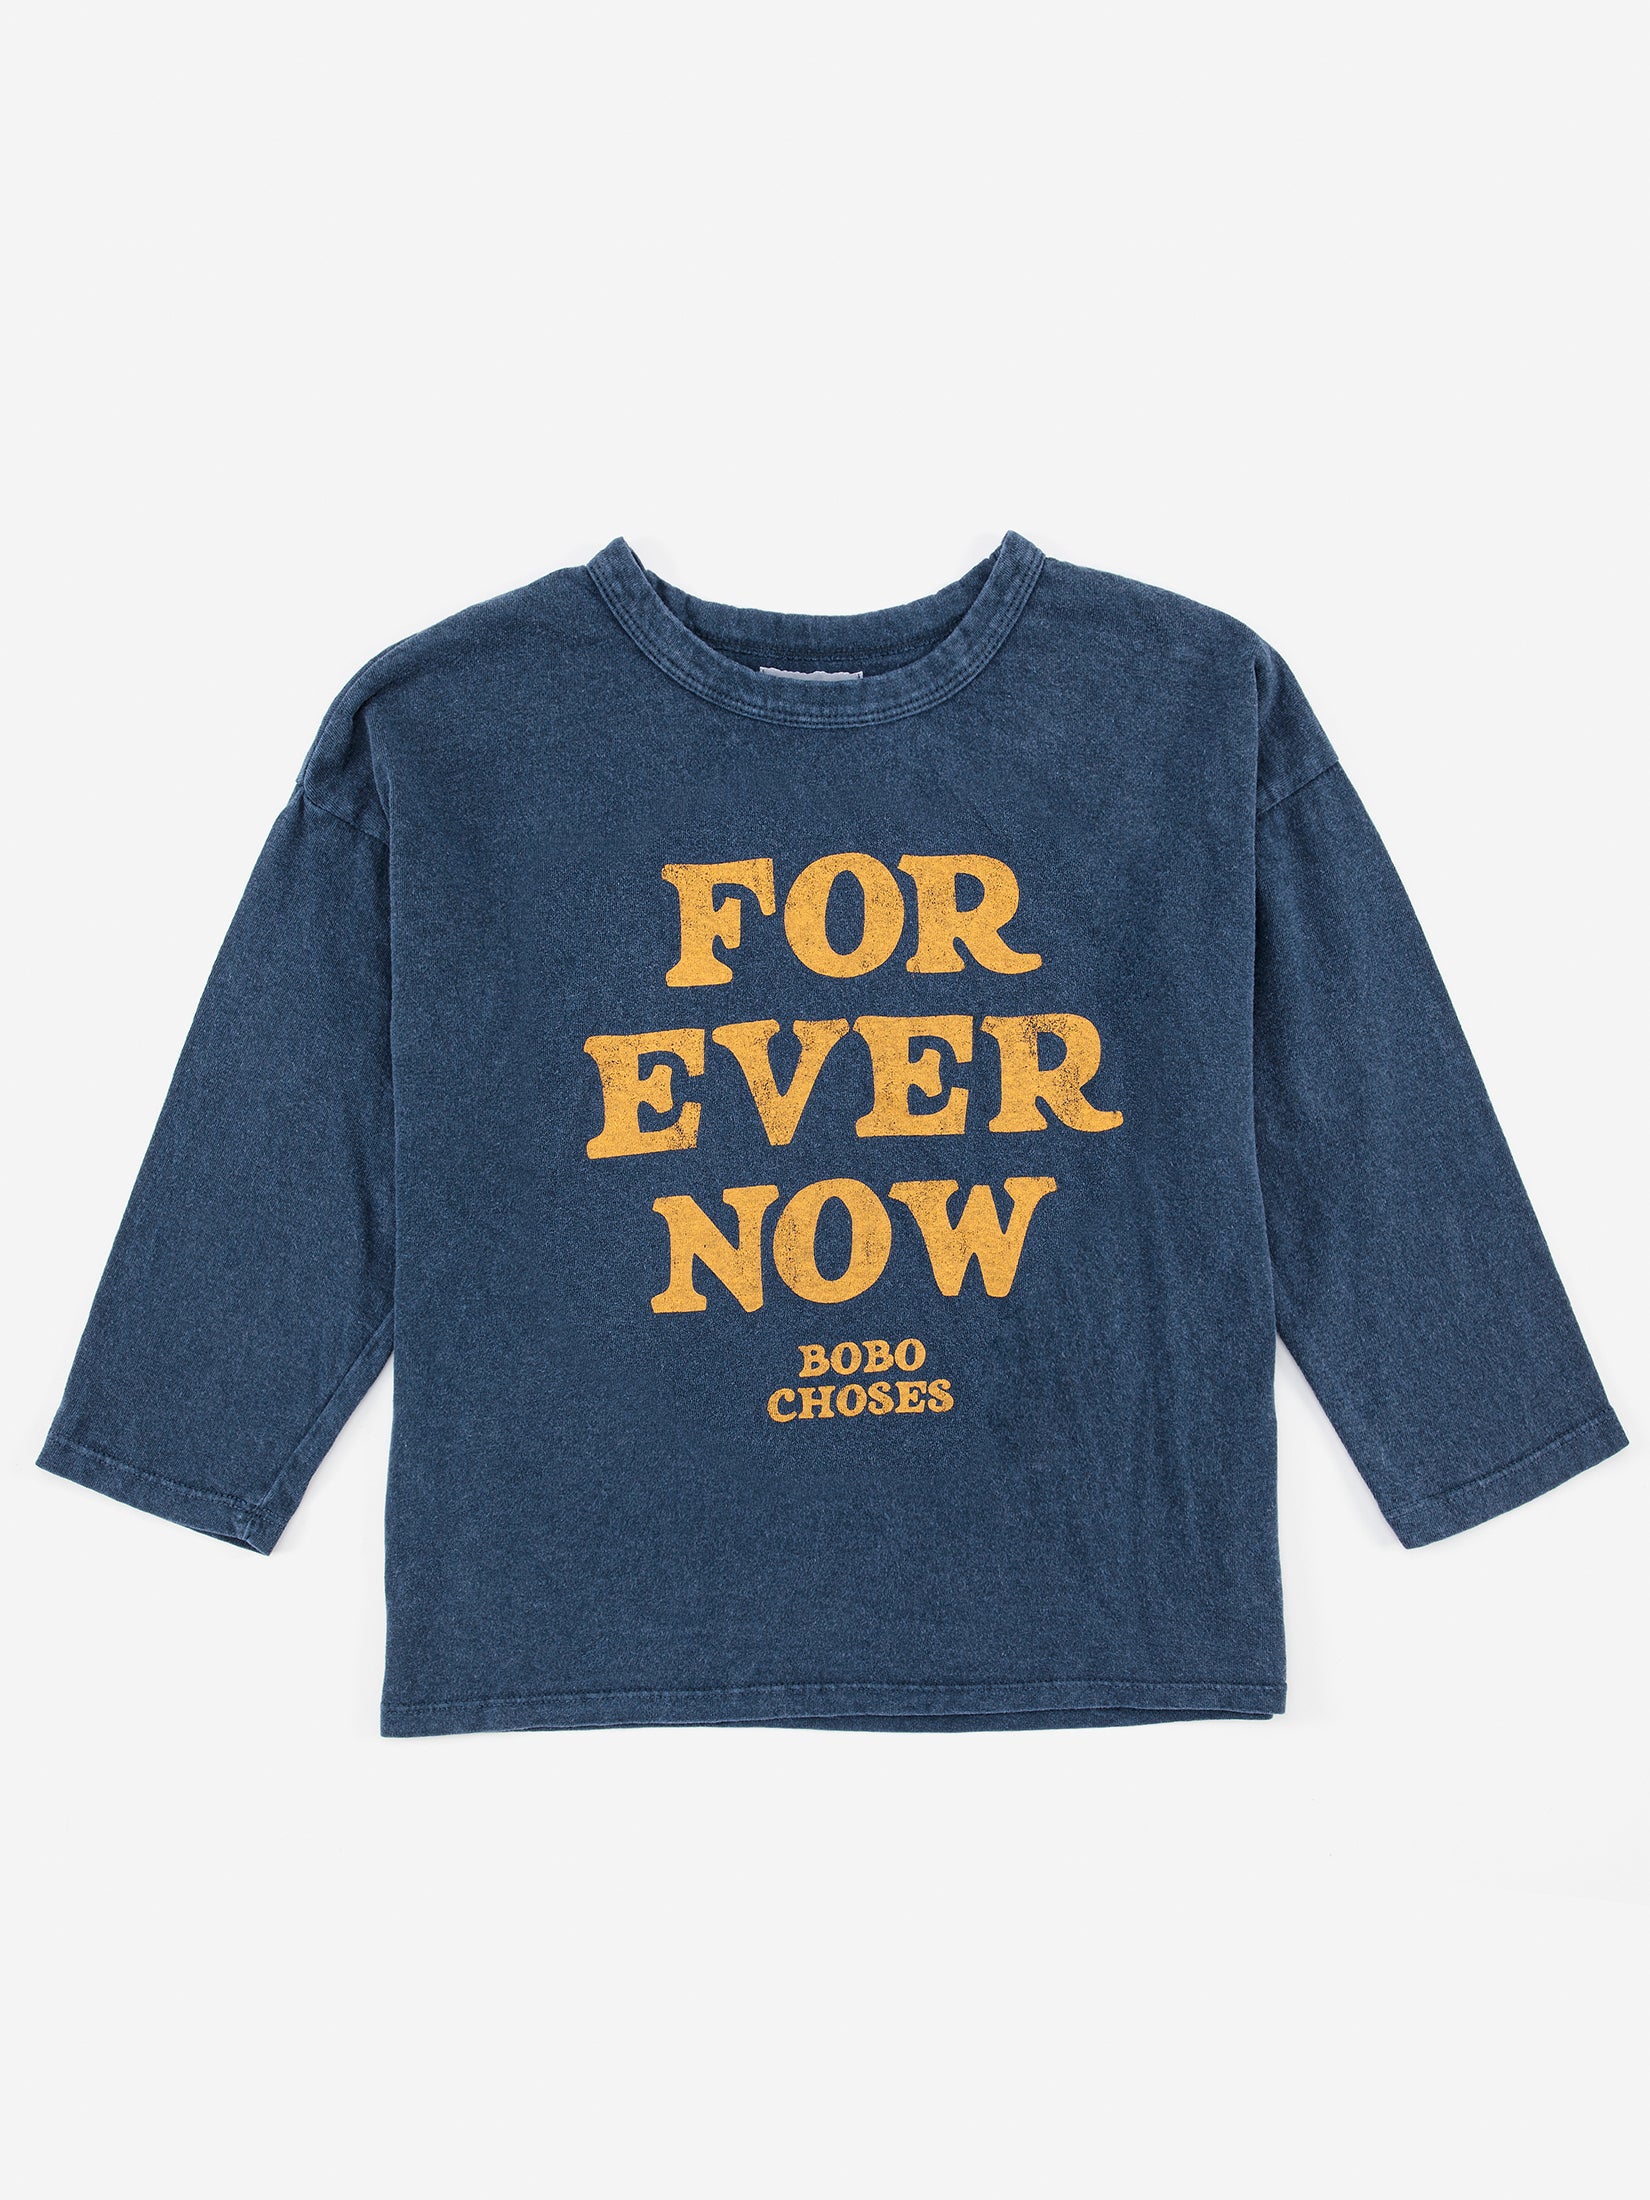 BOBO CHOSES FOREVER NOW YELLOW LS T-SHIRT